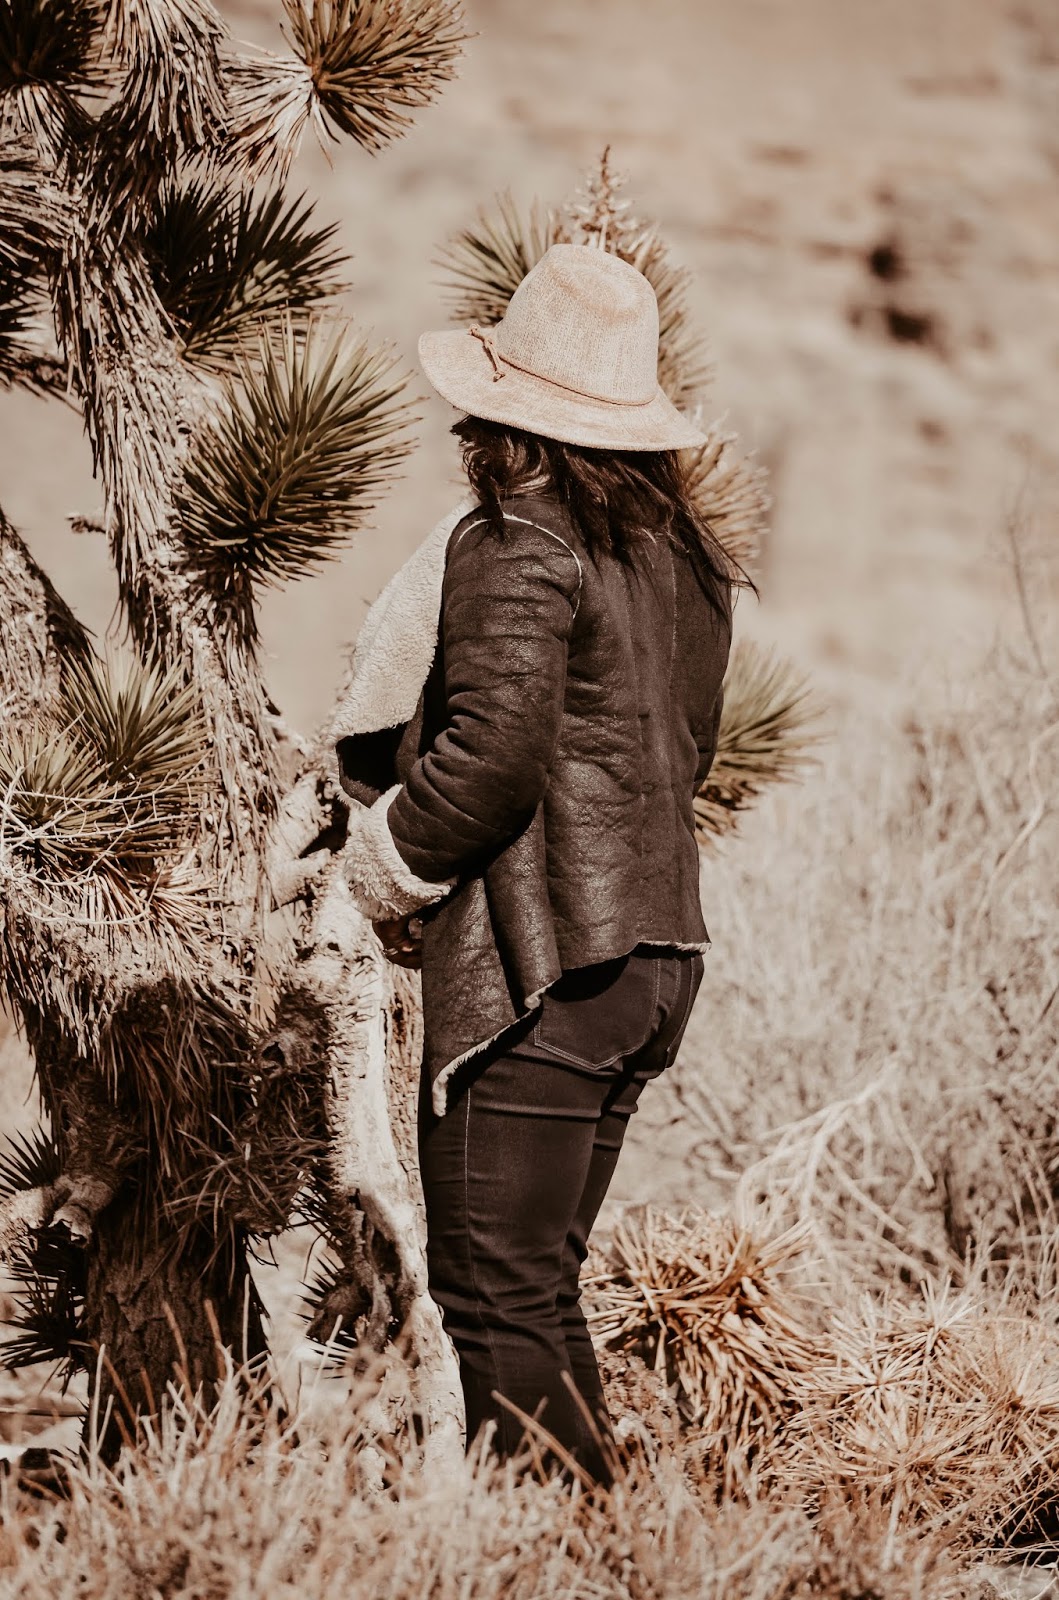 cowgirl-inthedesert-paige-denim-bootleg-jeans-pants-anthropologie-blush-plush-chenille-hat-guess-double-ring-belt-vintage-cateye-sunglasses-at-snowy-mount-charleston-lasvegas-nv